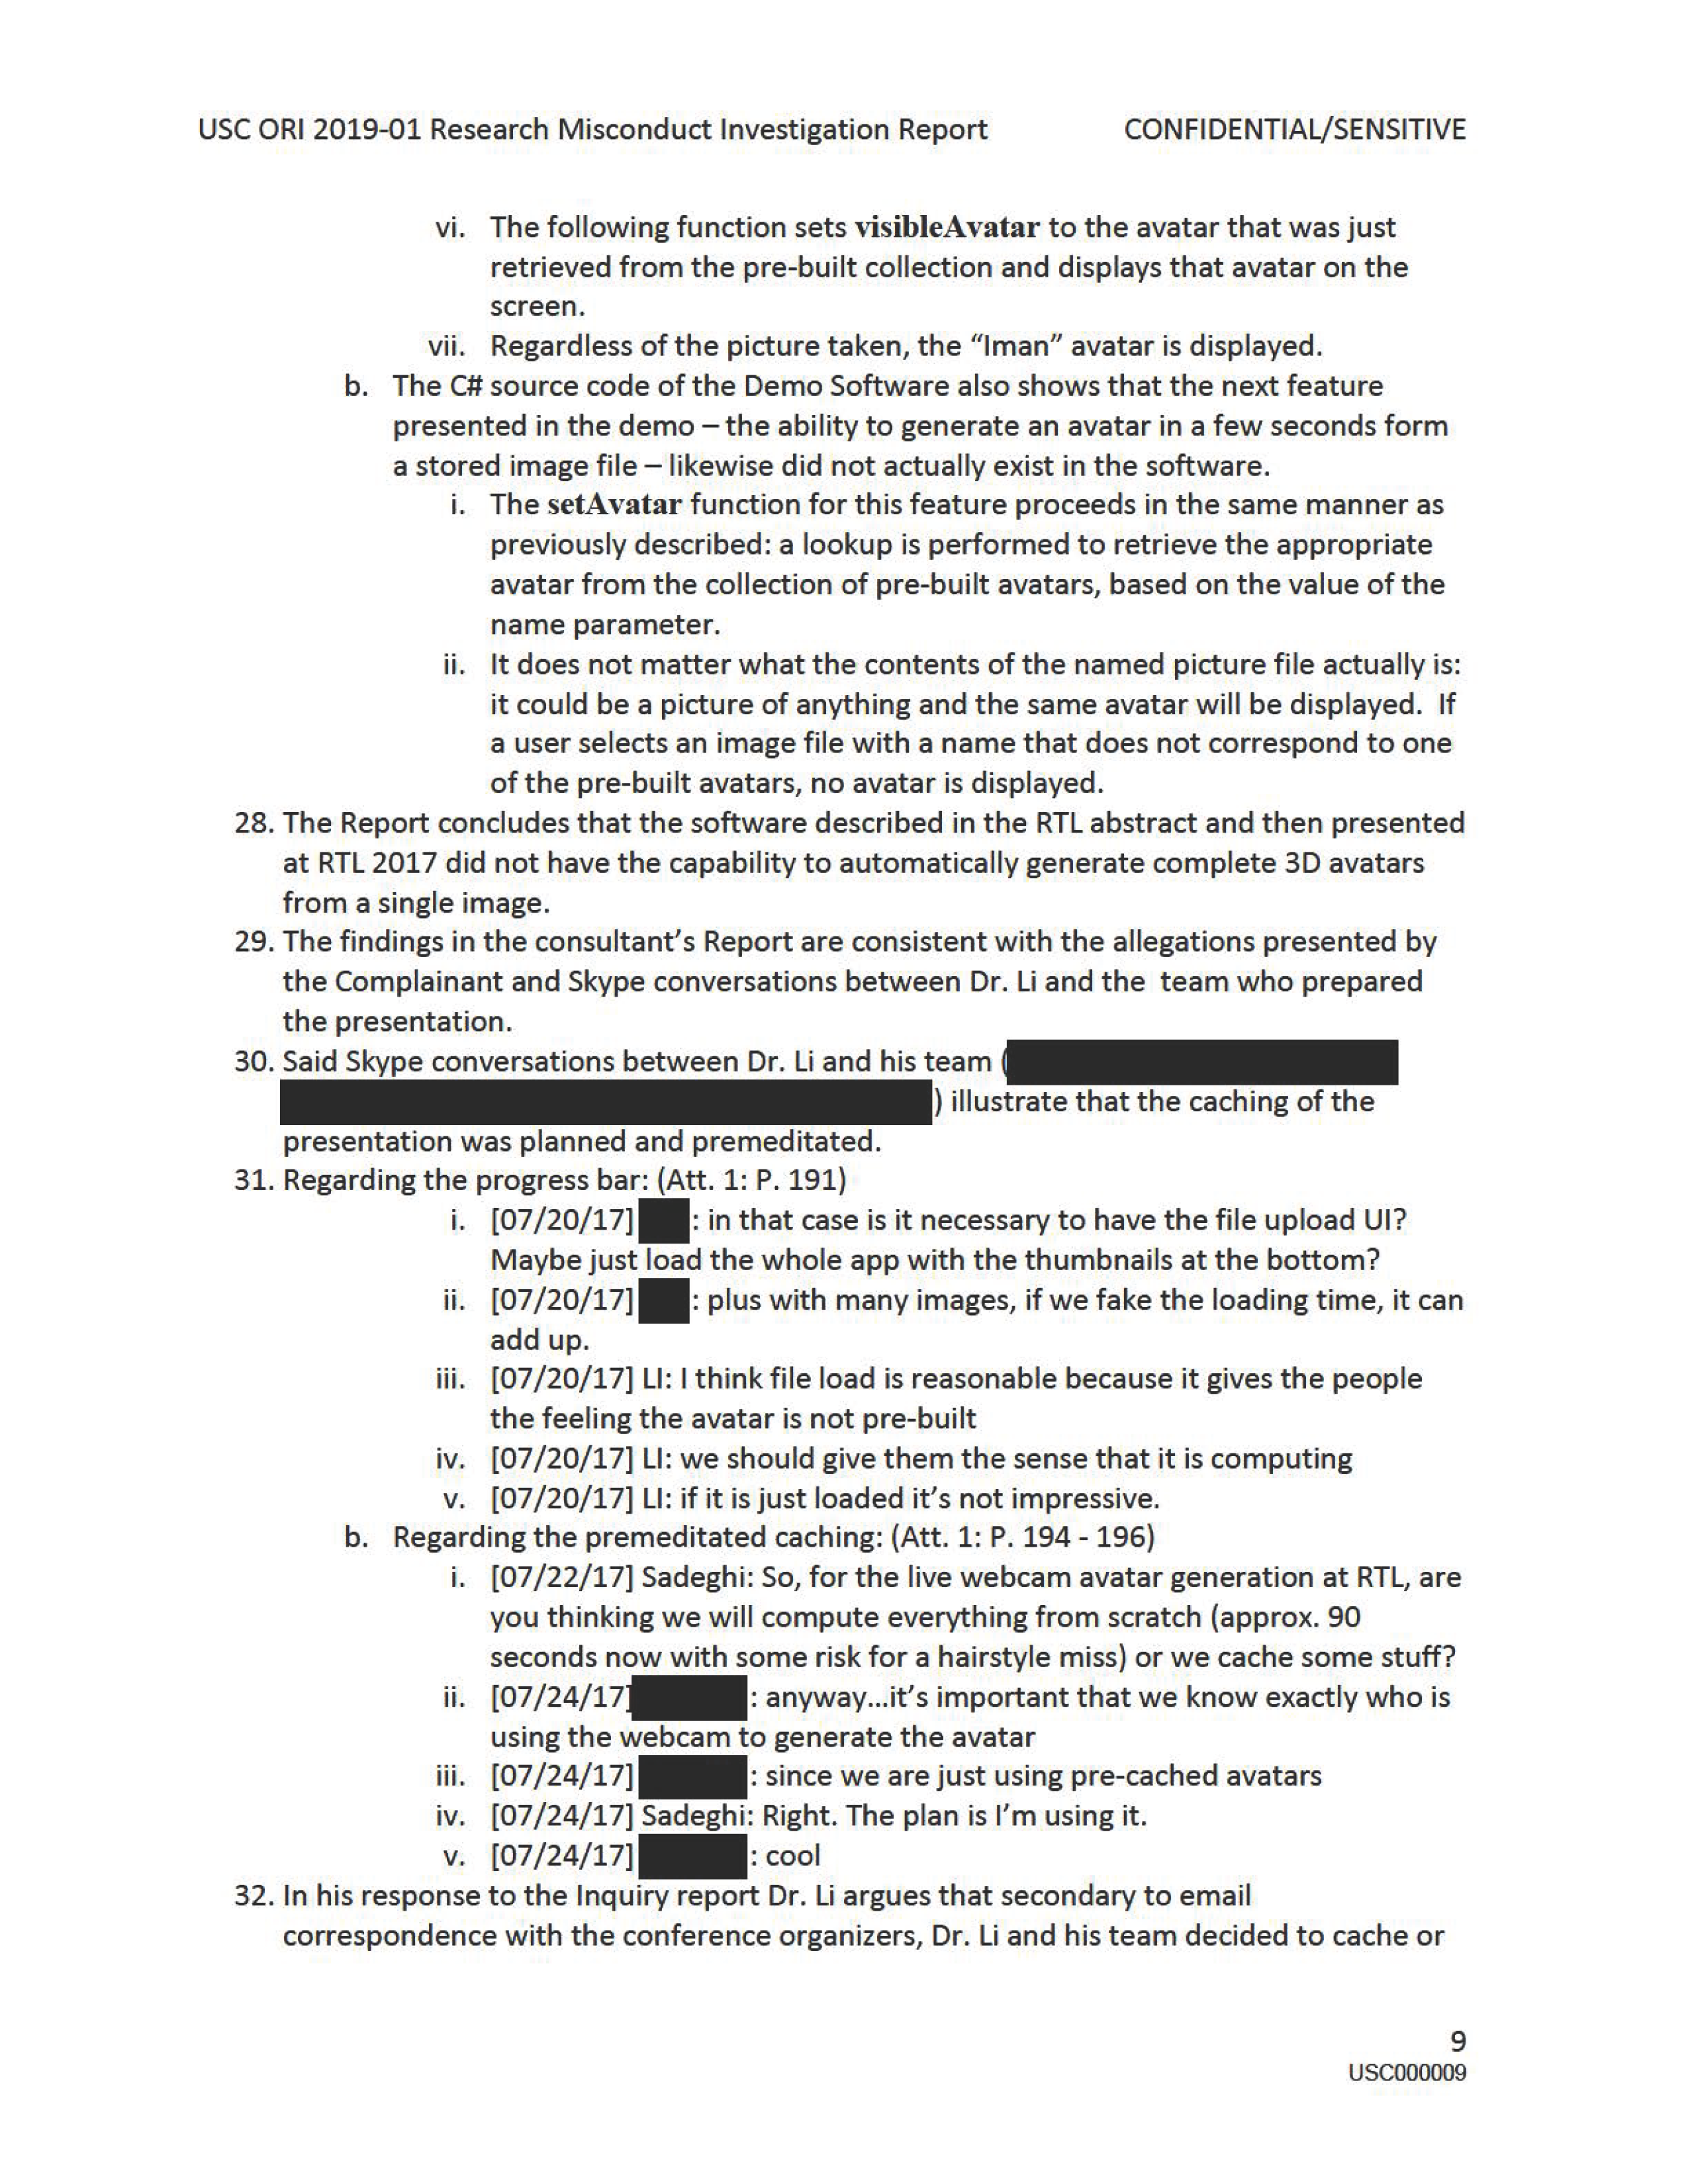 USC's Investigation Report re Hao Li's and Pinscreen's Scientific Misconduct at ACM SIGGRAPH RTL 2017 [Summary] Page 11